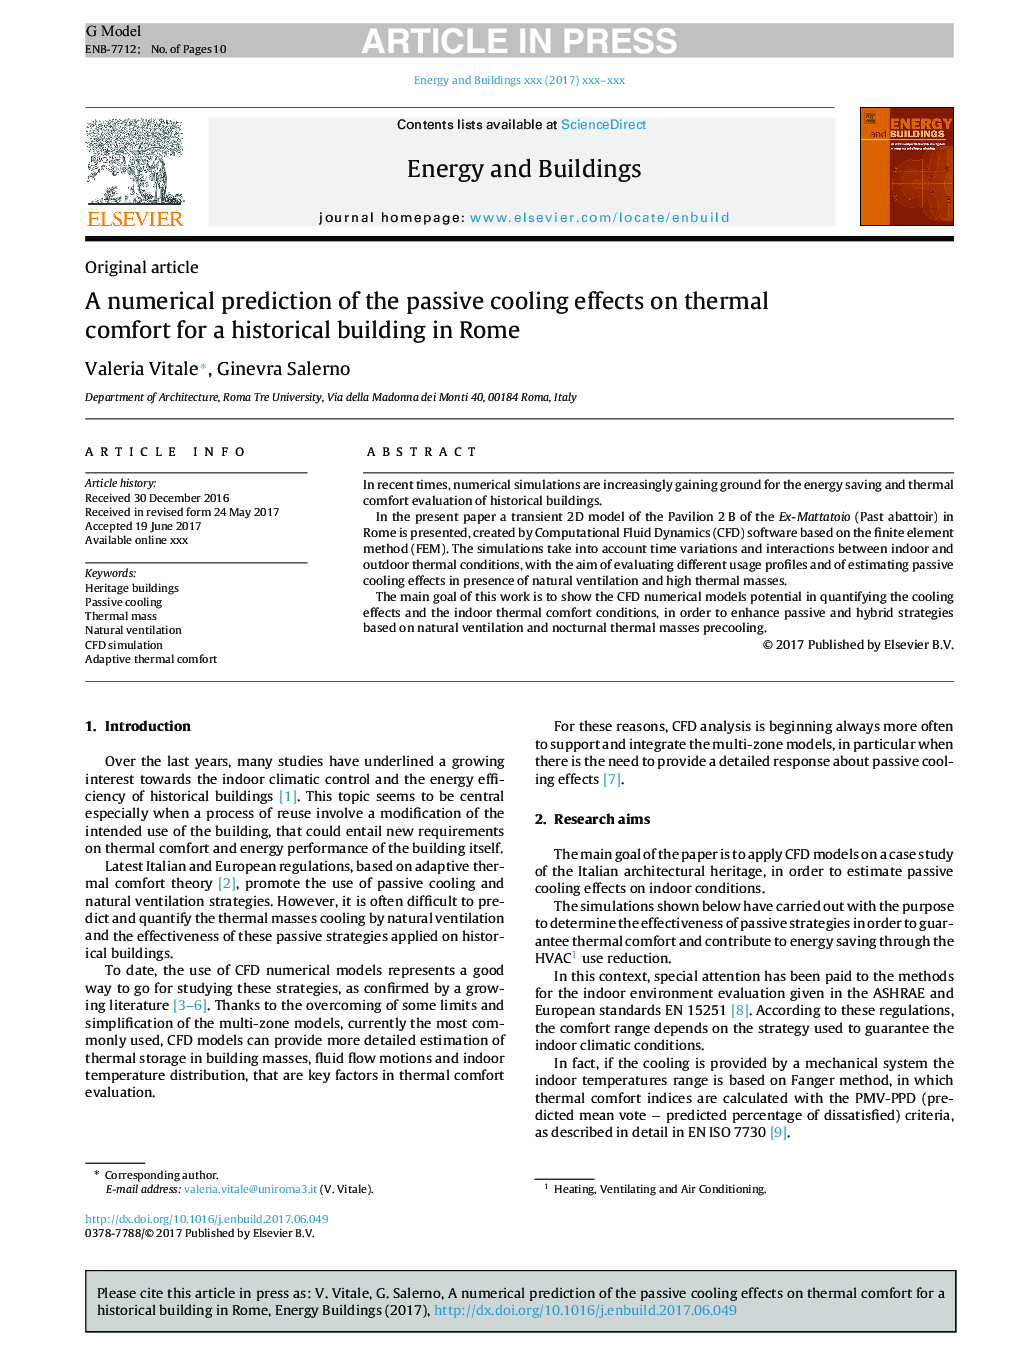 A numerical prediction of the passive cooling effects on thermal comfort for a historical building in Rome